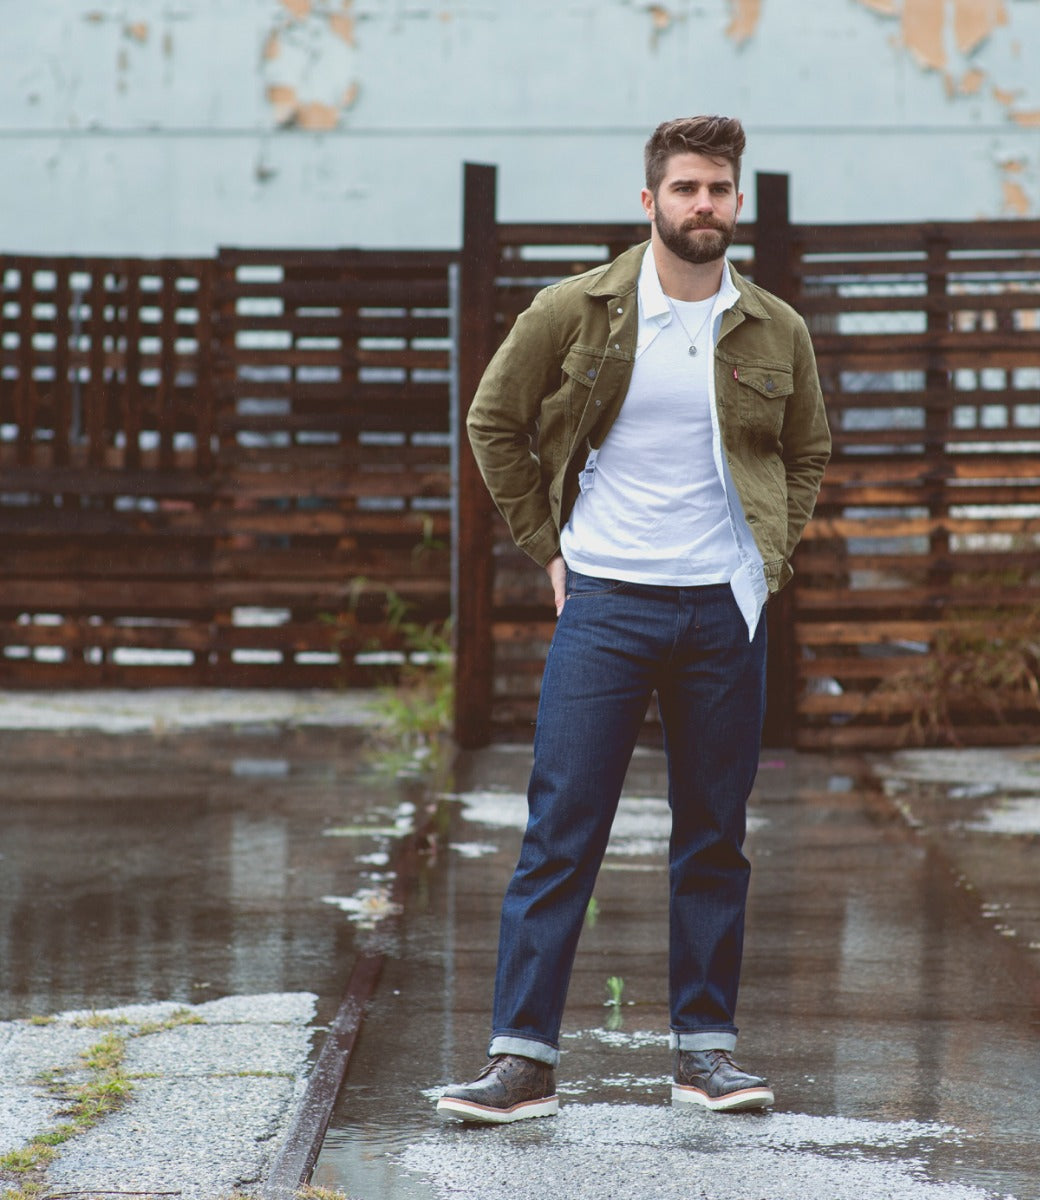 Man in a green jacket and jeans stands confidently in an urban setting with wet pavement and a rusted fence in the background, sporting Bed Stu Protege Light men's boots.